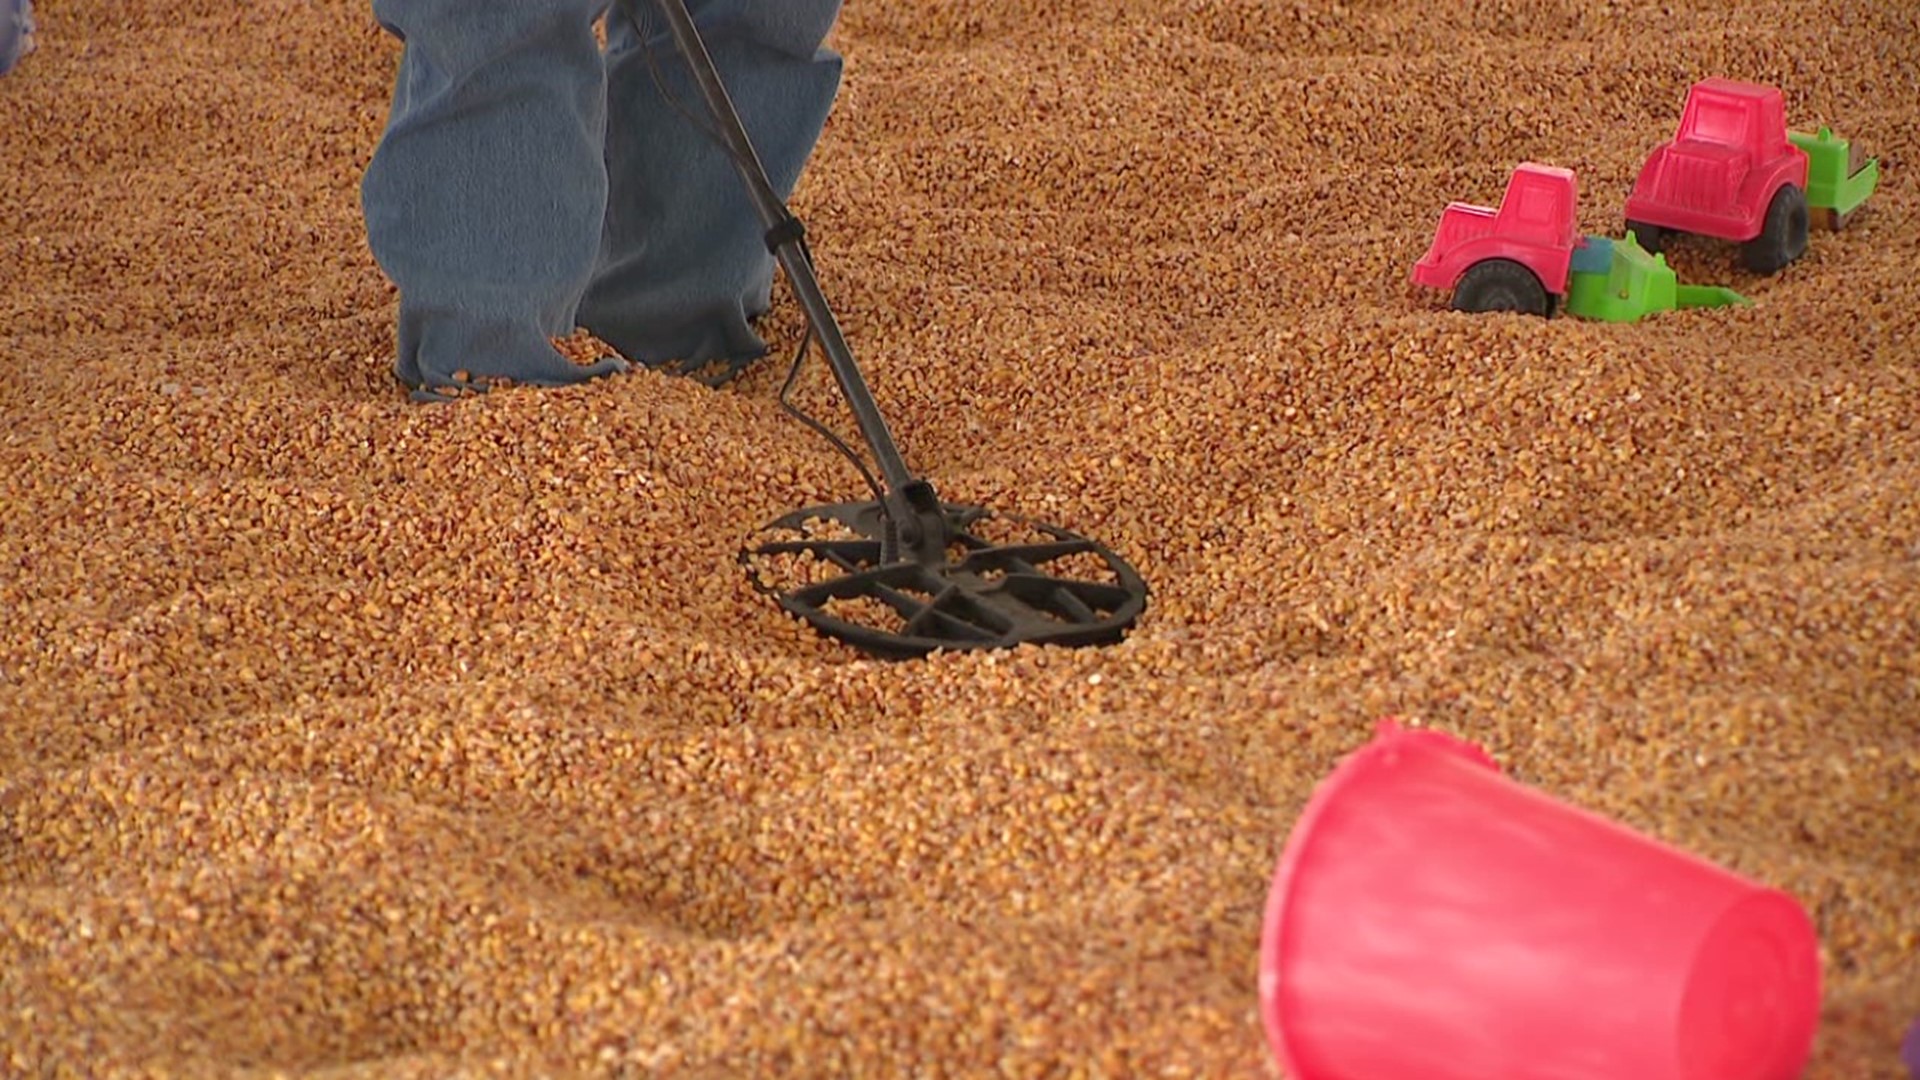 Lee Houser and his metal detector have been searching the corn pit at Lakeland Orchard and Cidery for a ring, but he's found much more in his search.